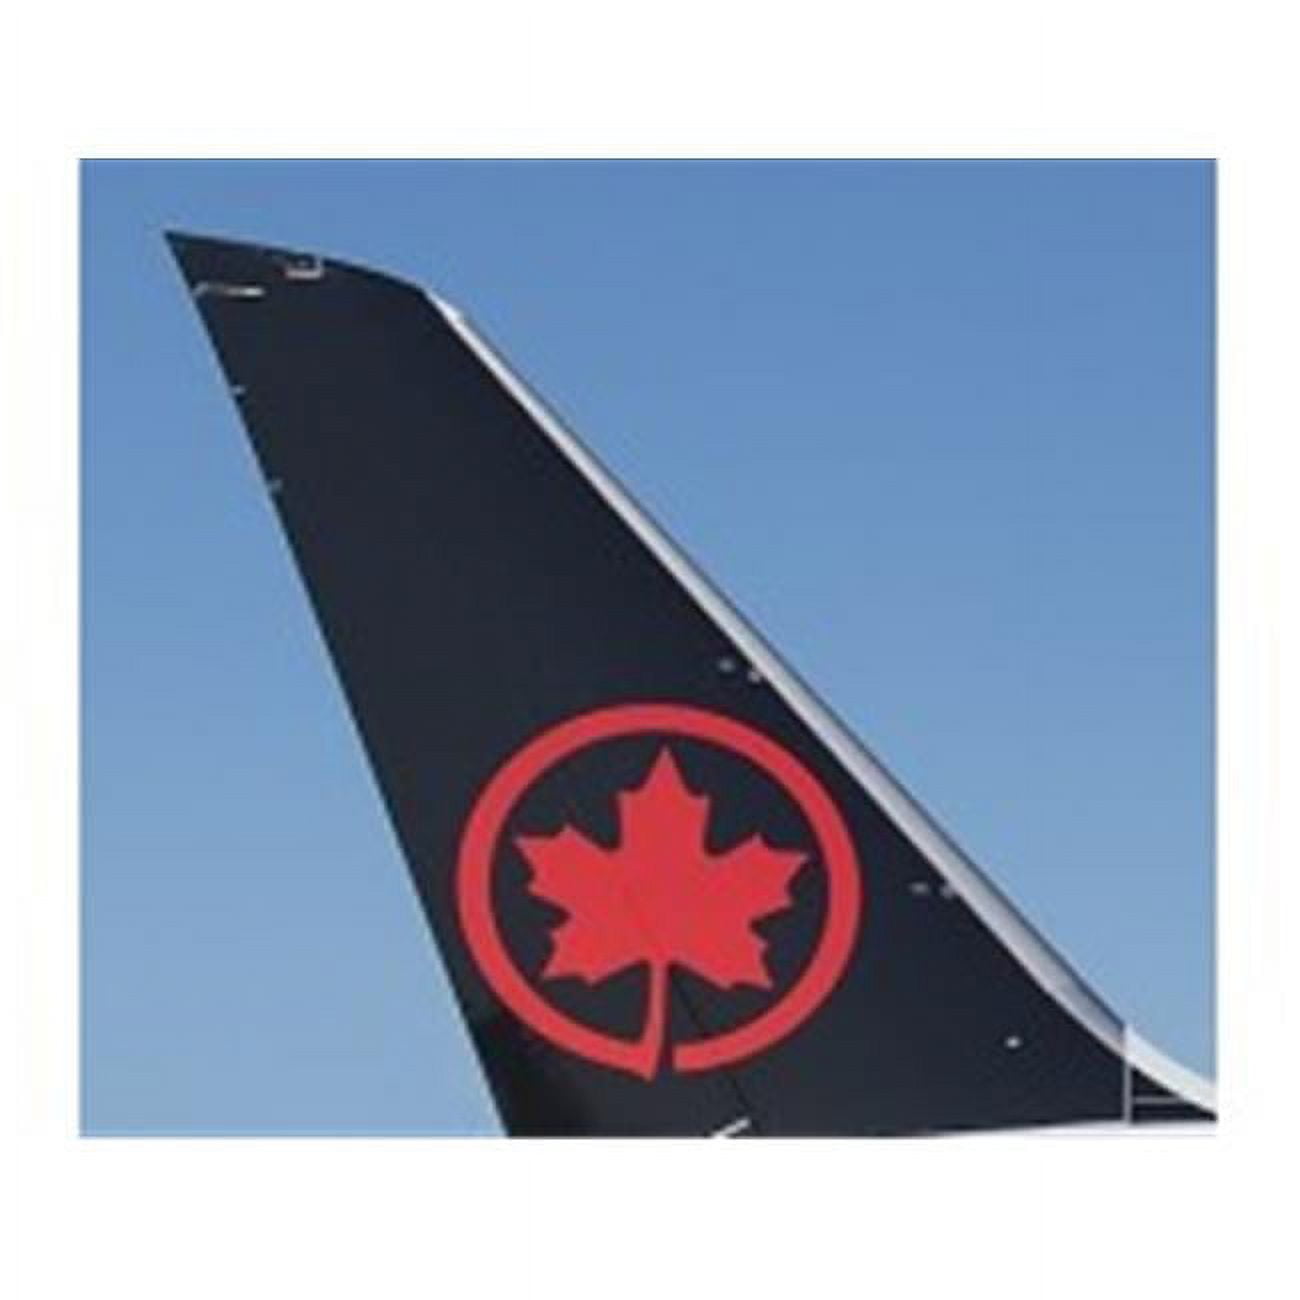 Skr9004 1 Isto 100 Air Canada 787-9 Model Plane With Wood Stand & Gear